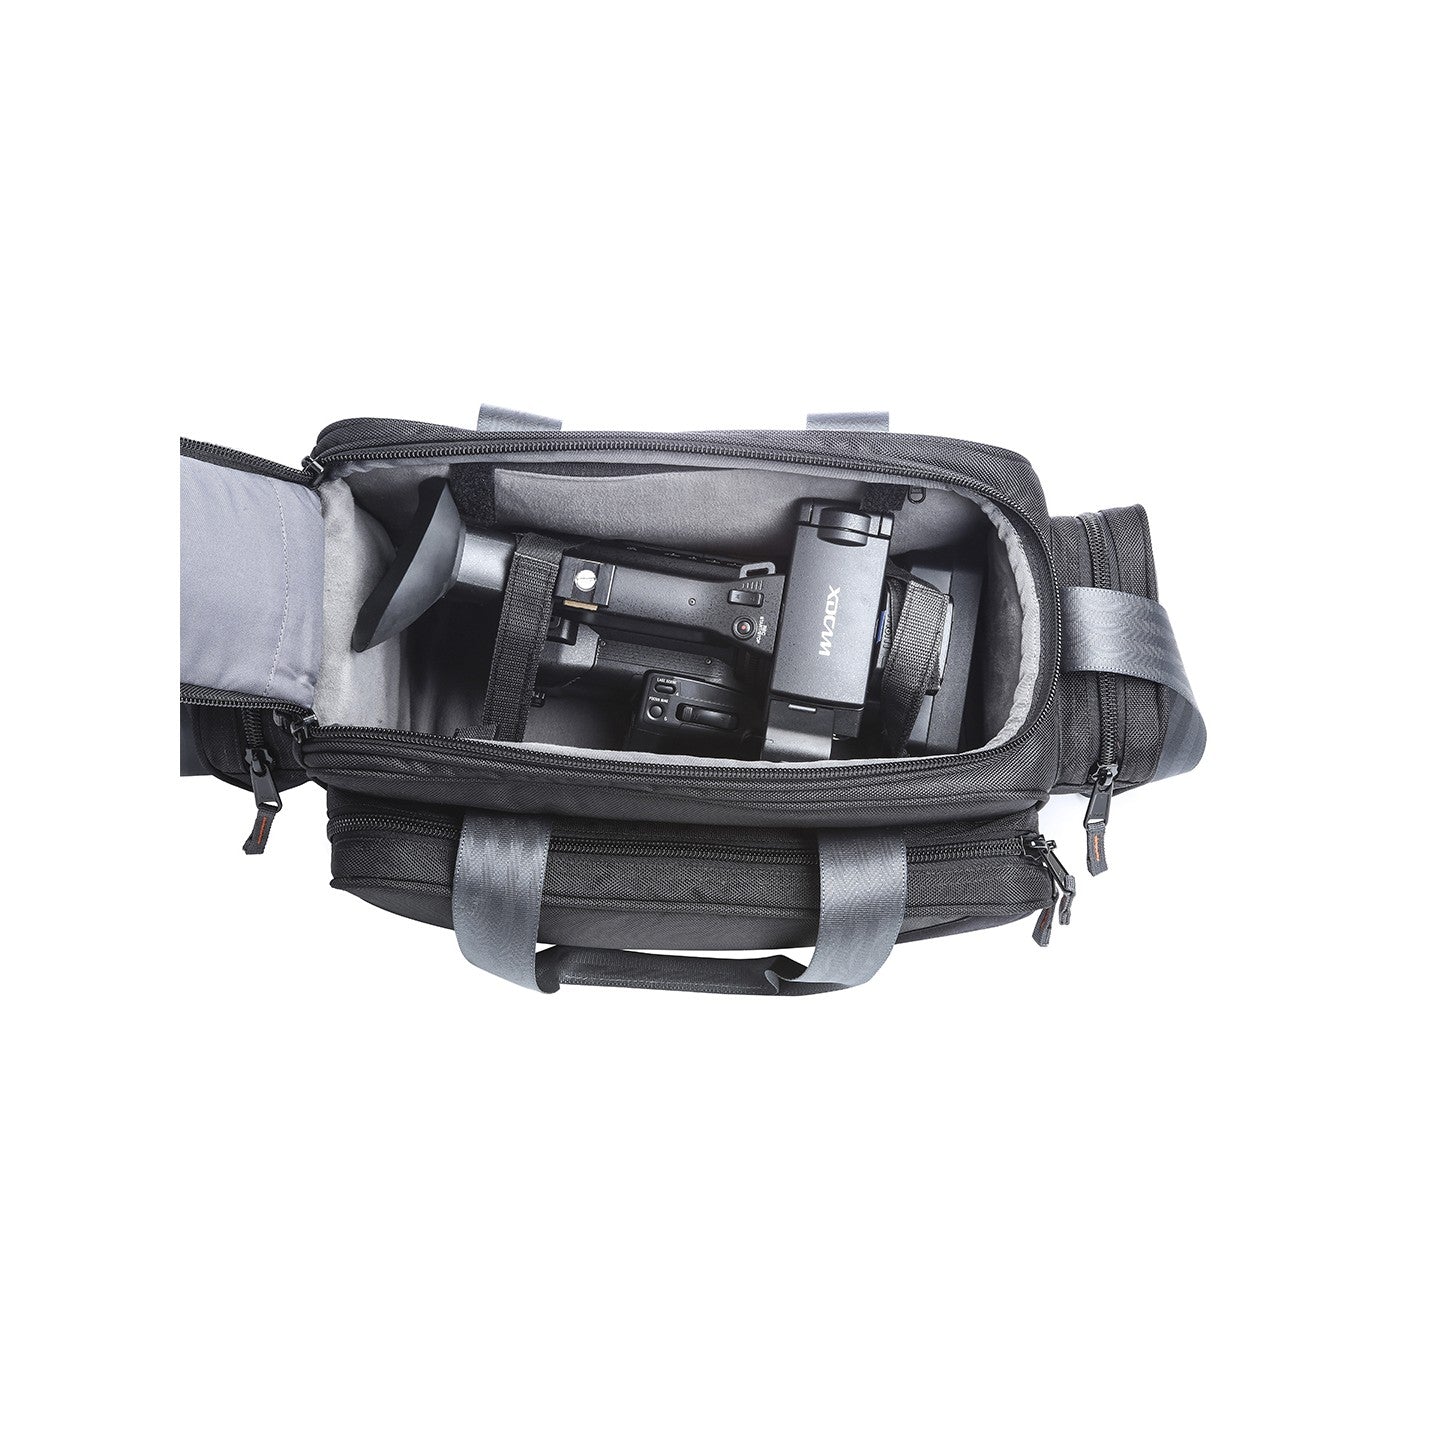 Image: Top view of the P43 Video Basic sling video camera bag, showcasing its interior loaded with a video camera and accessories. The bag's compact design and dedicated compartments ensure secure and organized storage for videography gear. Stay ready to capture stunning footage with the P43 Video Basic.